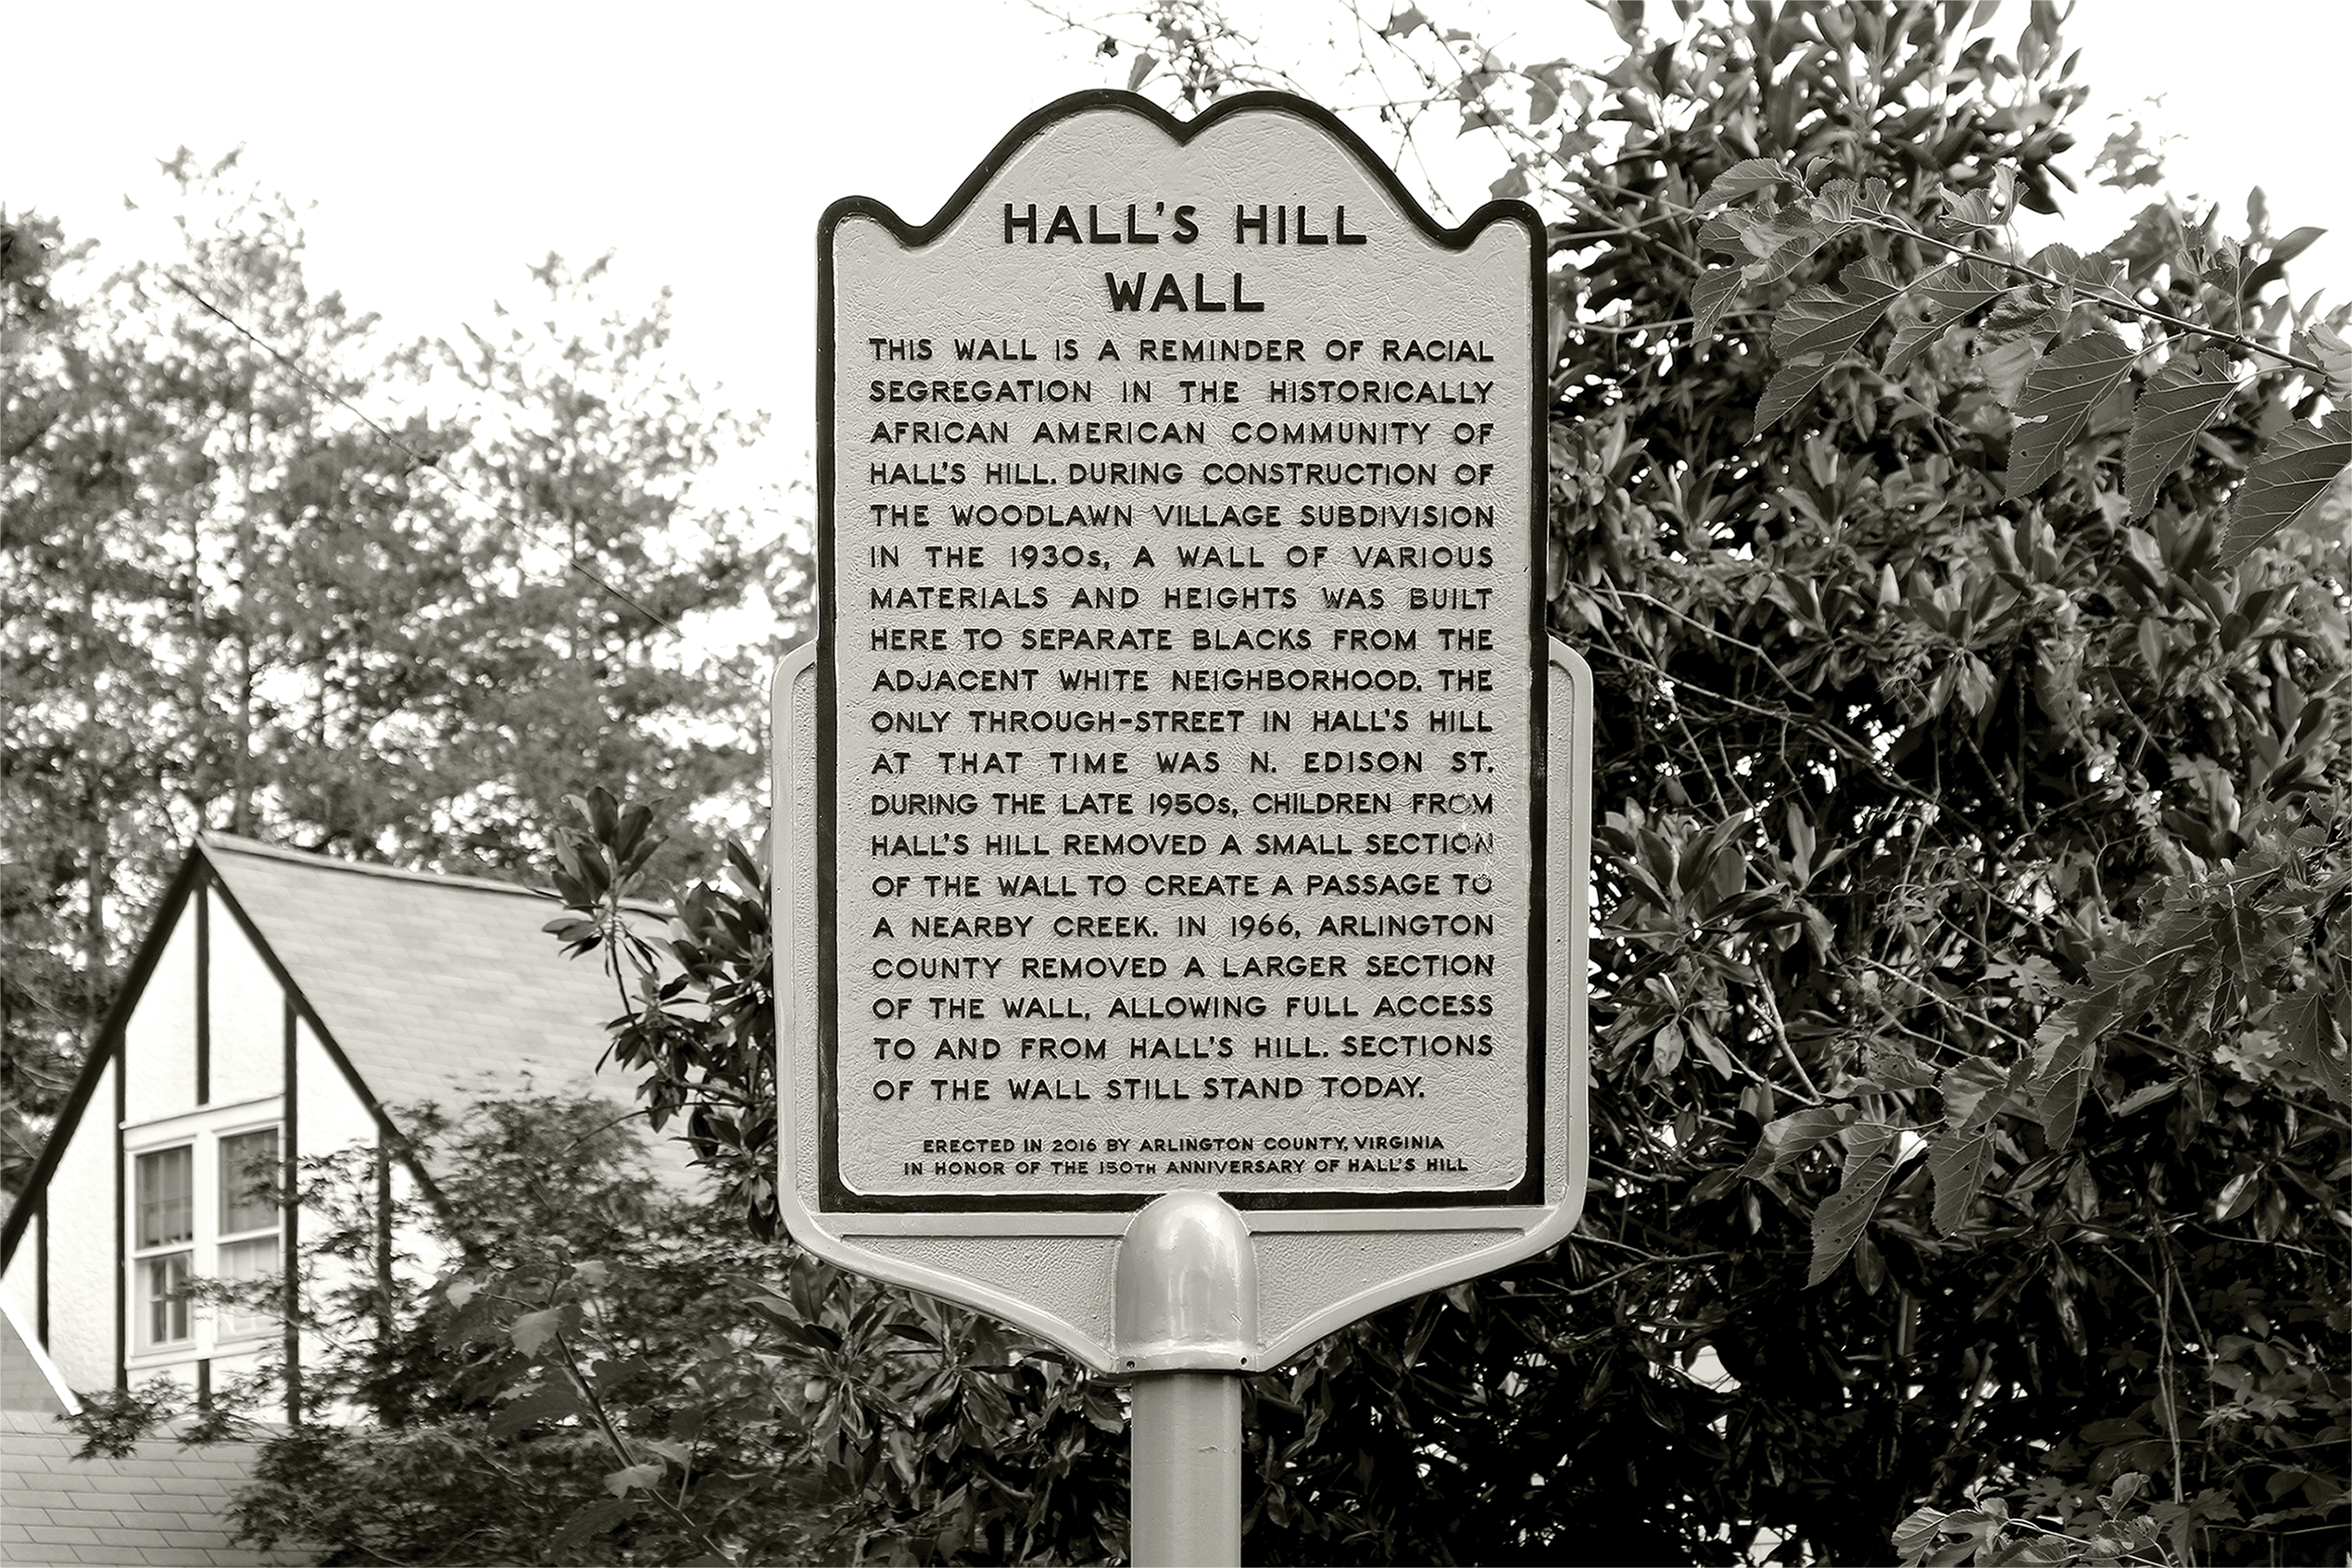 At the intersection of North Culpeper Street and 17th Street North in Arlington, remnants of a wall that once extended from North Edison Street to North Glebe Road. The wall was constructed in the 1930s to physically separate the white neighborhood of Woodlawn (now Waycroft-Woodlawn) from the historically Black neighborhood of Hall’s Hill. Photo by Carol Woolf.